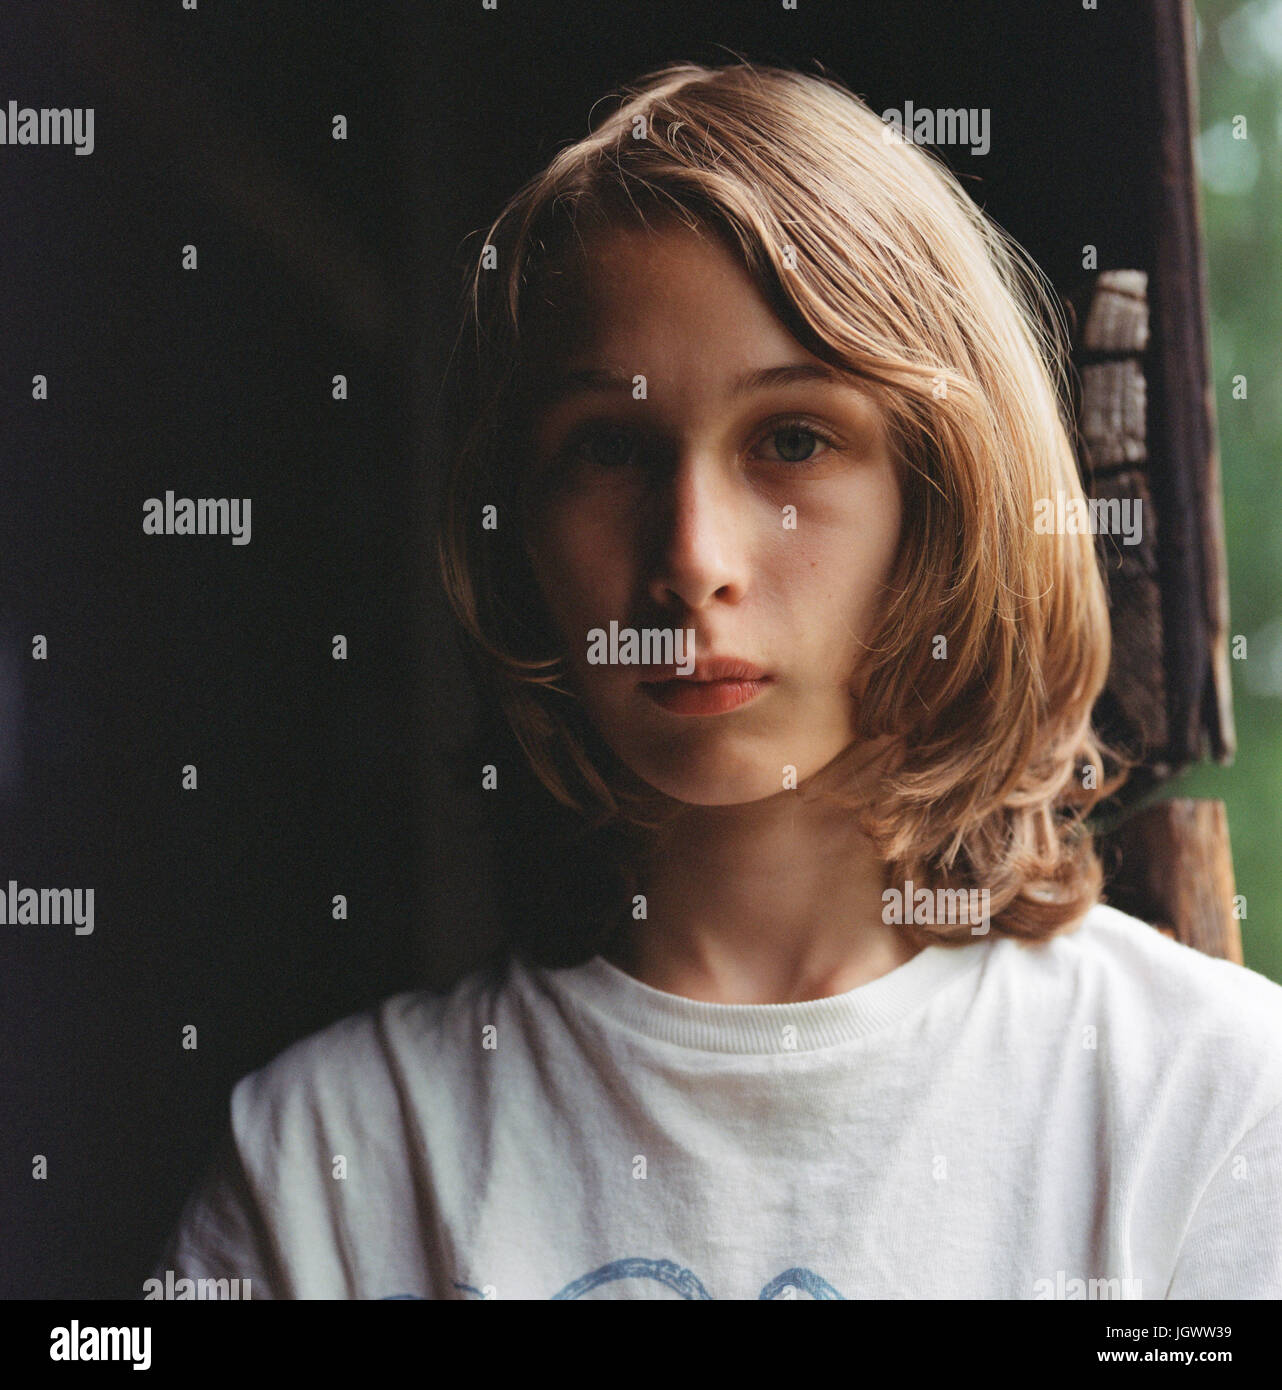 Portrait of boy with long hair, pensive expression Stock Photo